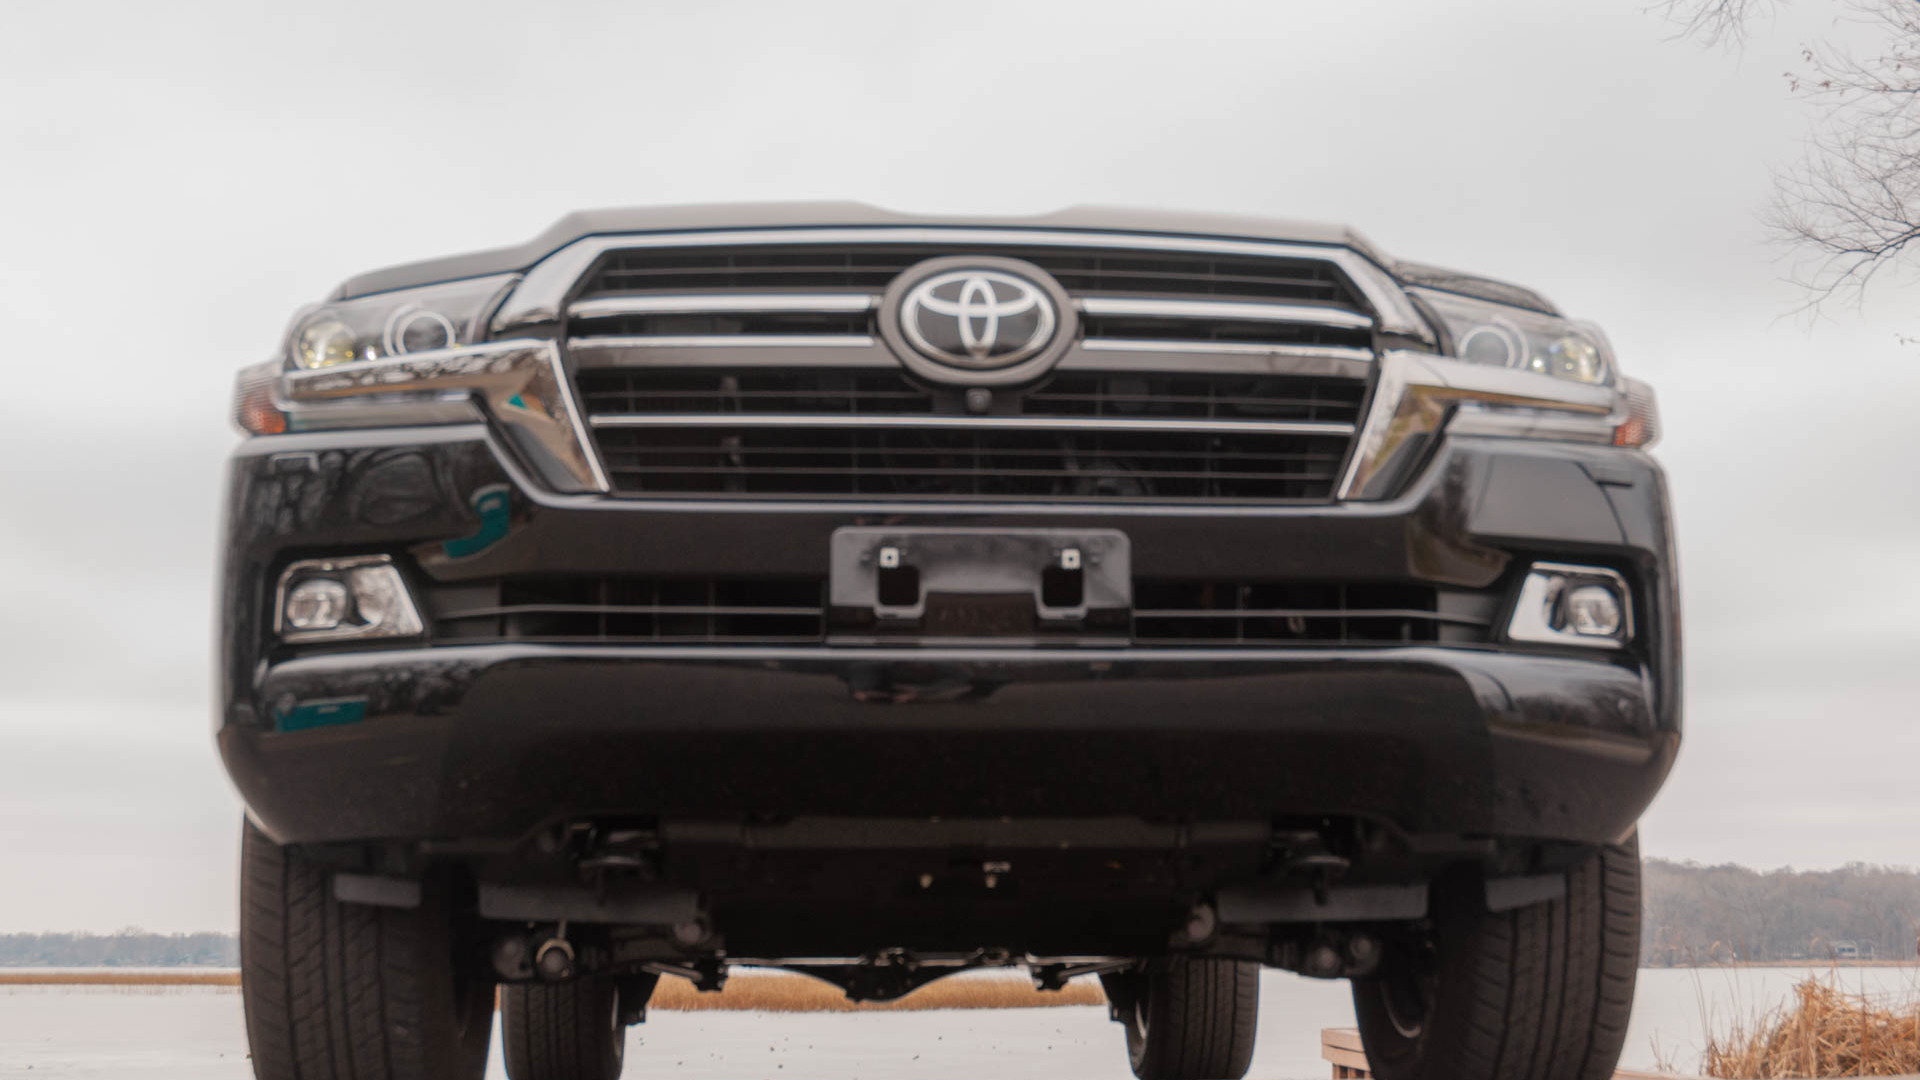 174 Popular New toyota tundra 2019 price in pakistan for Iphone Home Screen